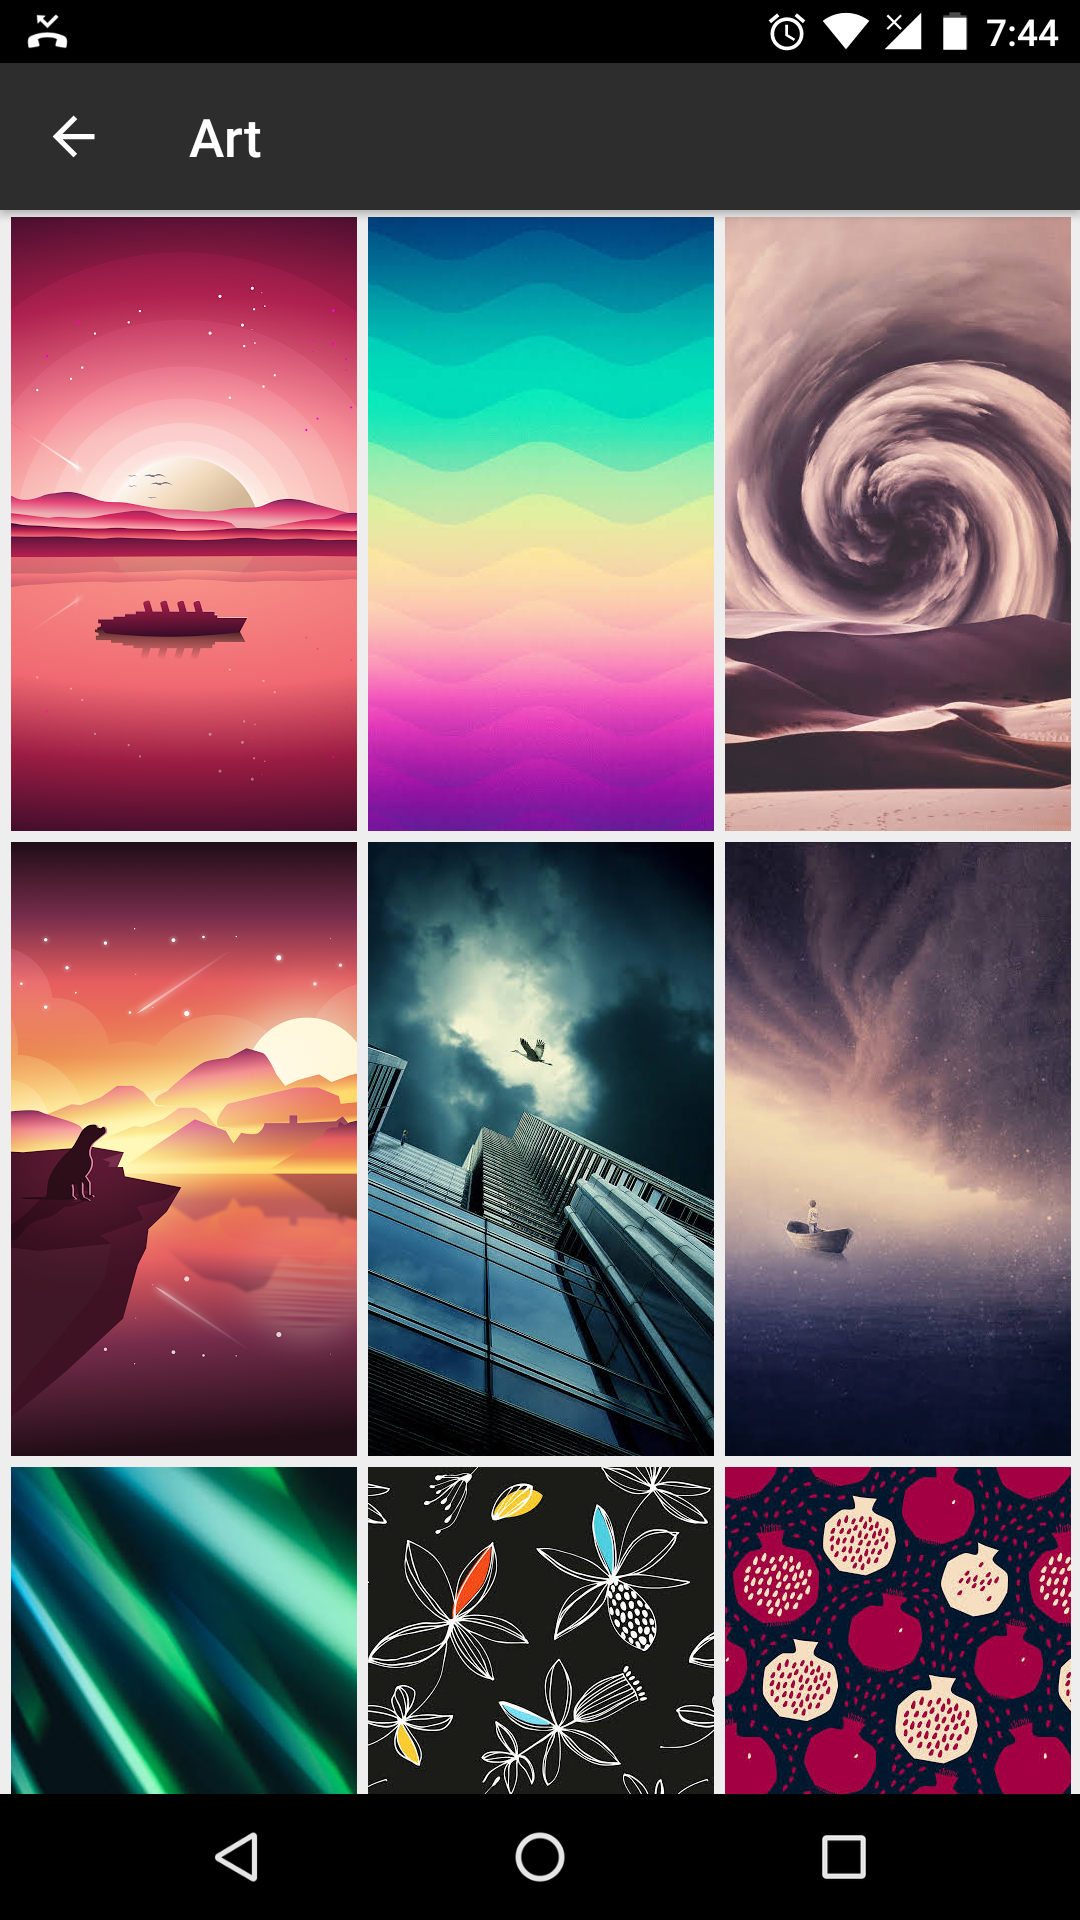 google phone wallpaper,sky,graphic design,collage,colorfulness,photography